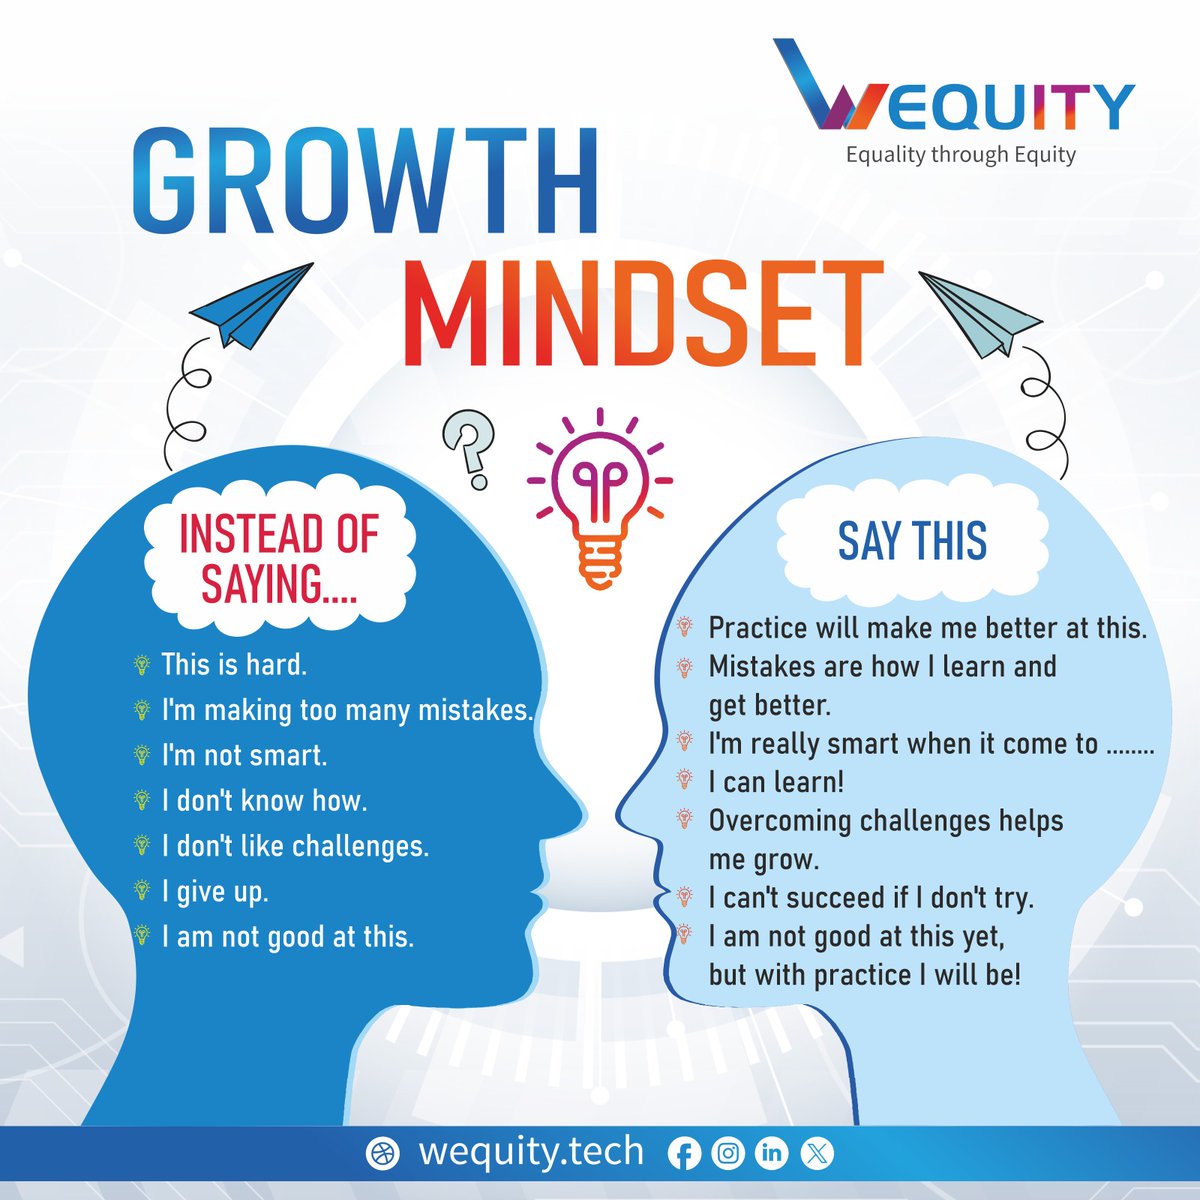 🚀𝐀𝐝𝐨𝐩𝐭 𝐚 𝐠𝐫𝐨𝐰𝐭𝐡 𝐦𝐢𝐧𝐝𝐬𝐞𝐭! 

Instead of dwelling on challenges, embrace them as #opportunities for growth. 🔝

#wequity #womenintech #wit #growthmindset #embracechallenges #positivethinking #personaldevelopment #techwomen #womenempowerment #womenleaders